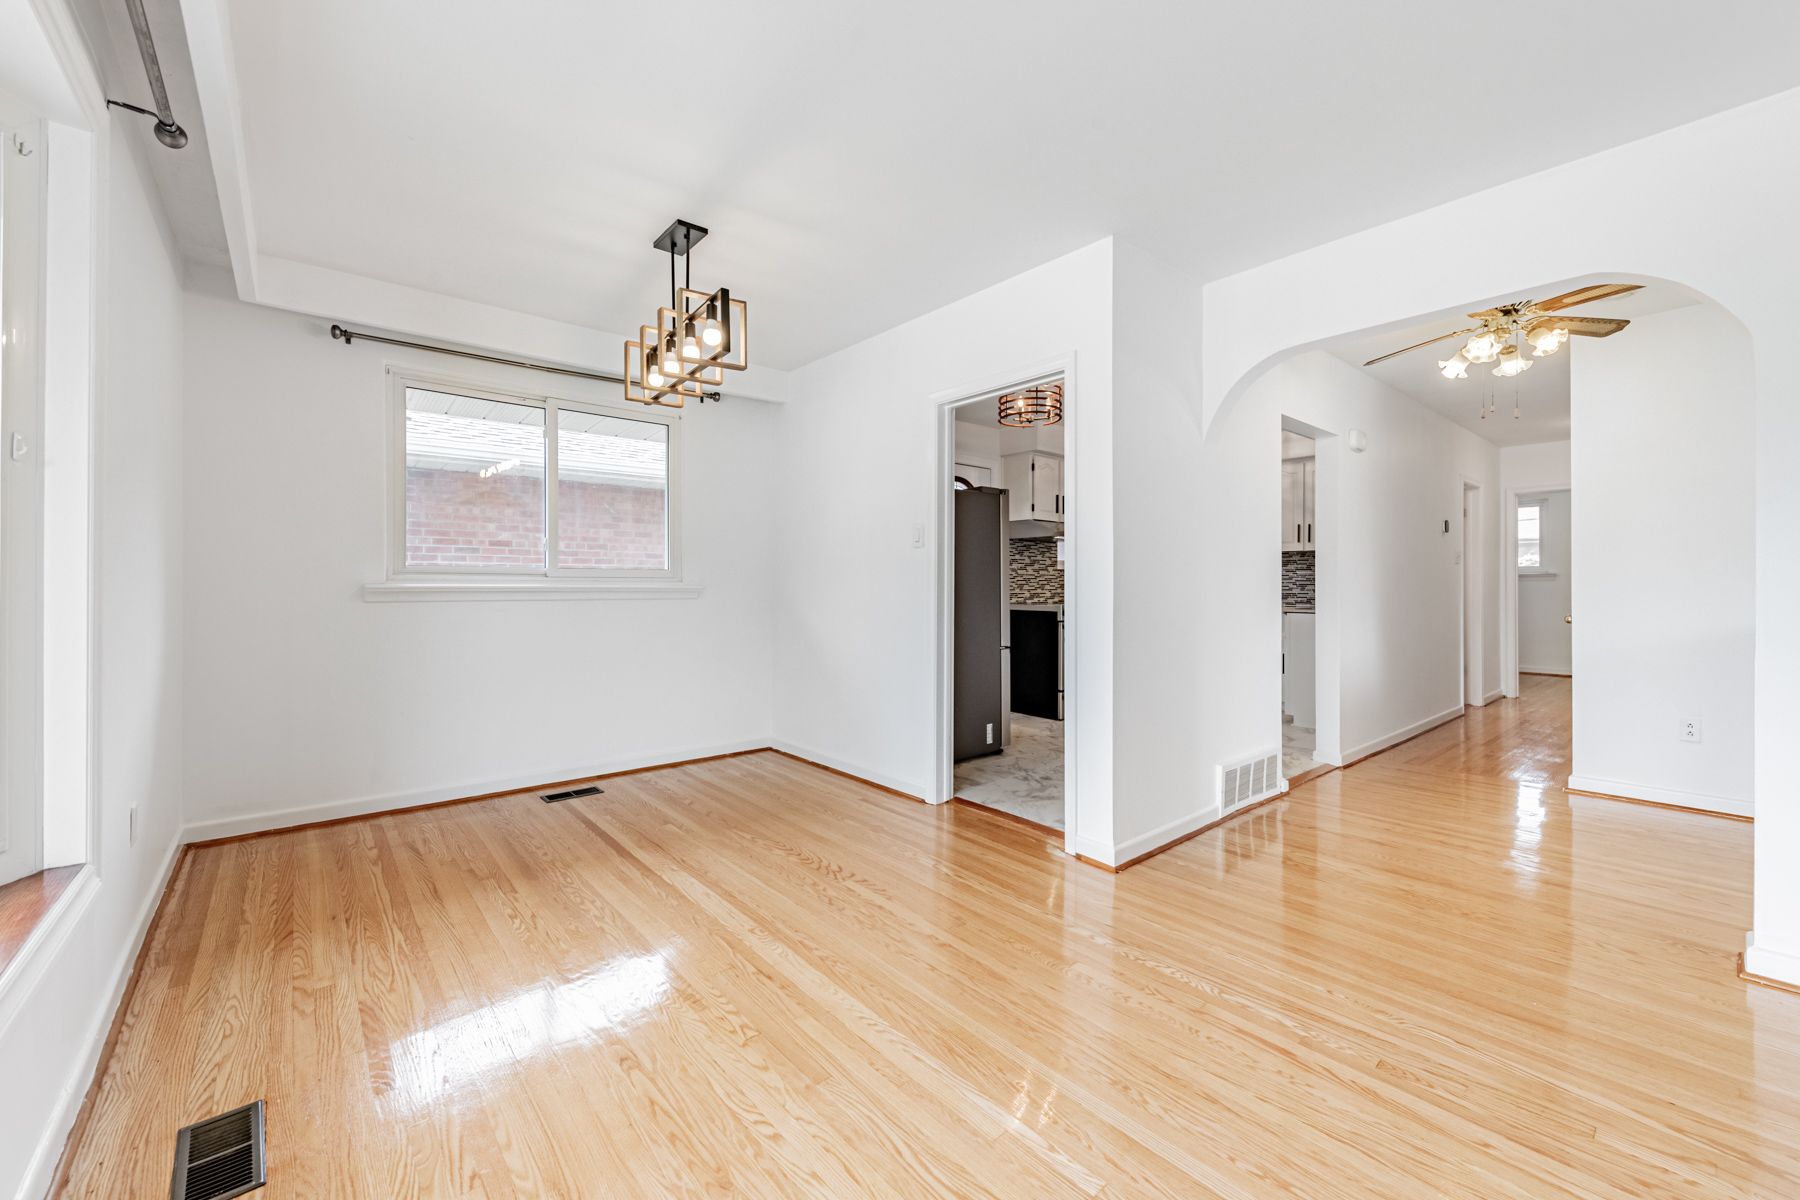 House living and dining room with gleaming hardwood floors and elegant light-fixtures.